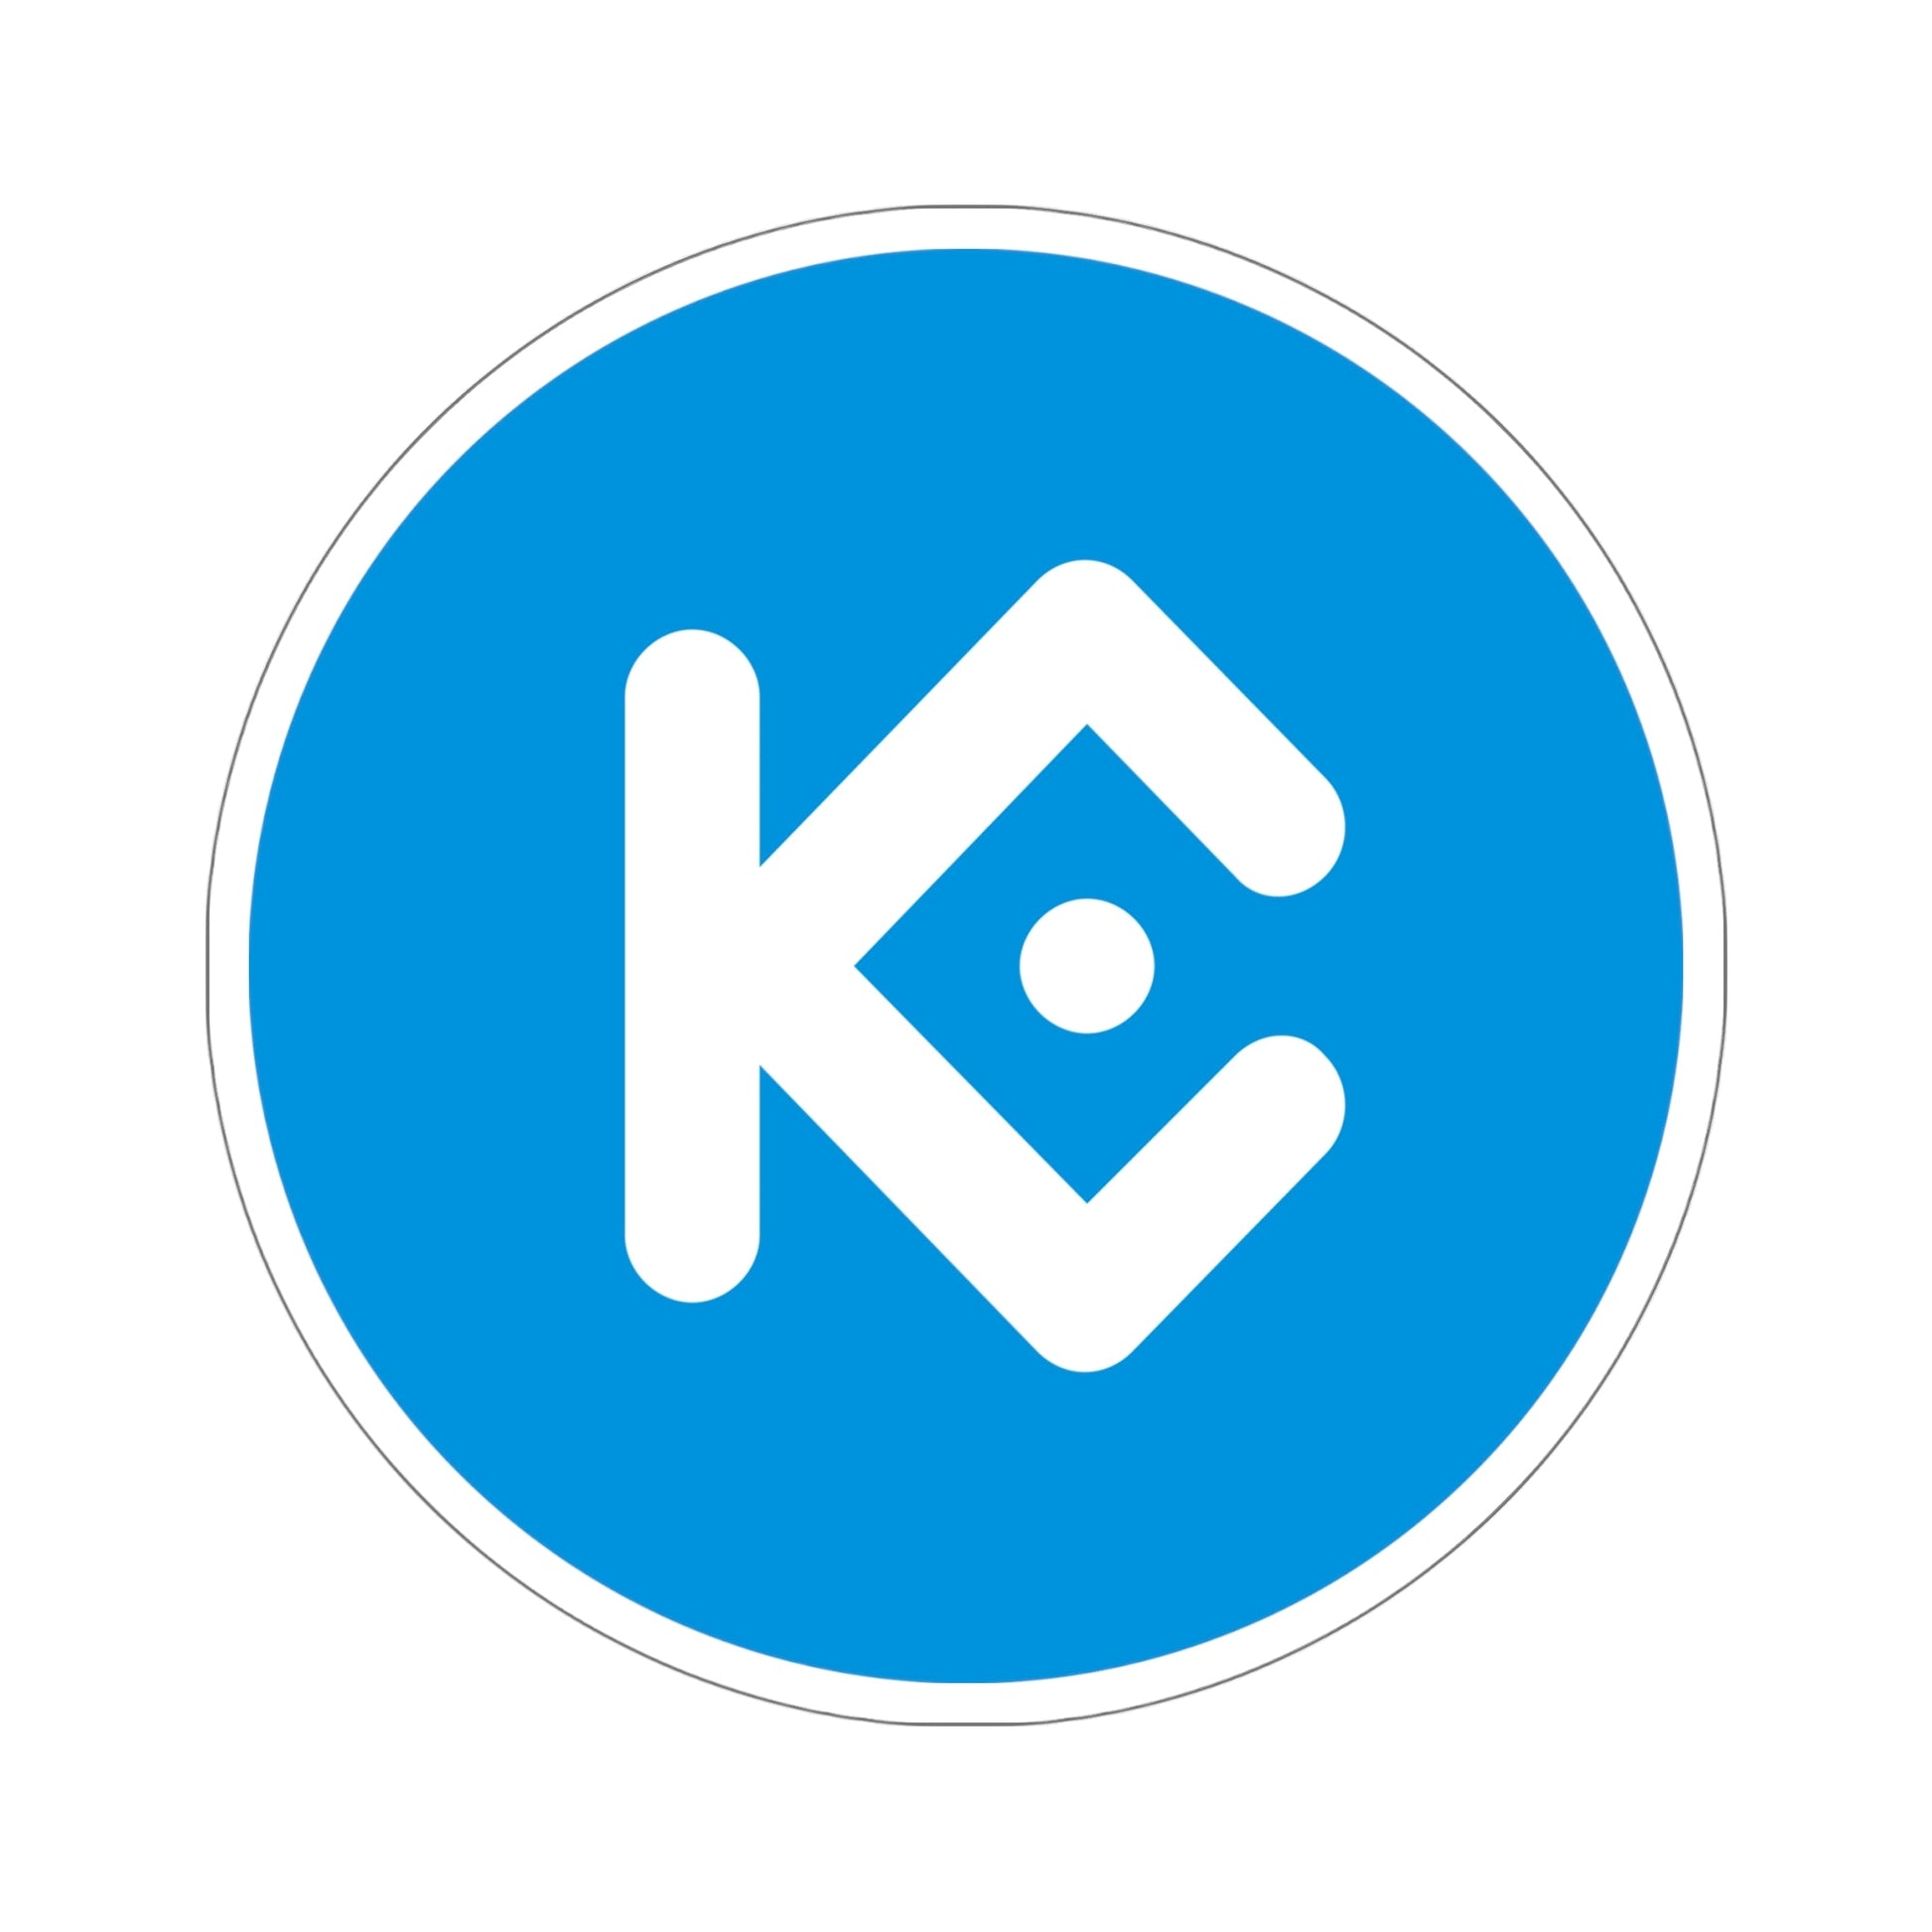 KUCOIN SHARES KCS (Cryptocurrency) STICKER Vinyl Die-Cut Decal-6 Inch-The Sticker Space